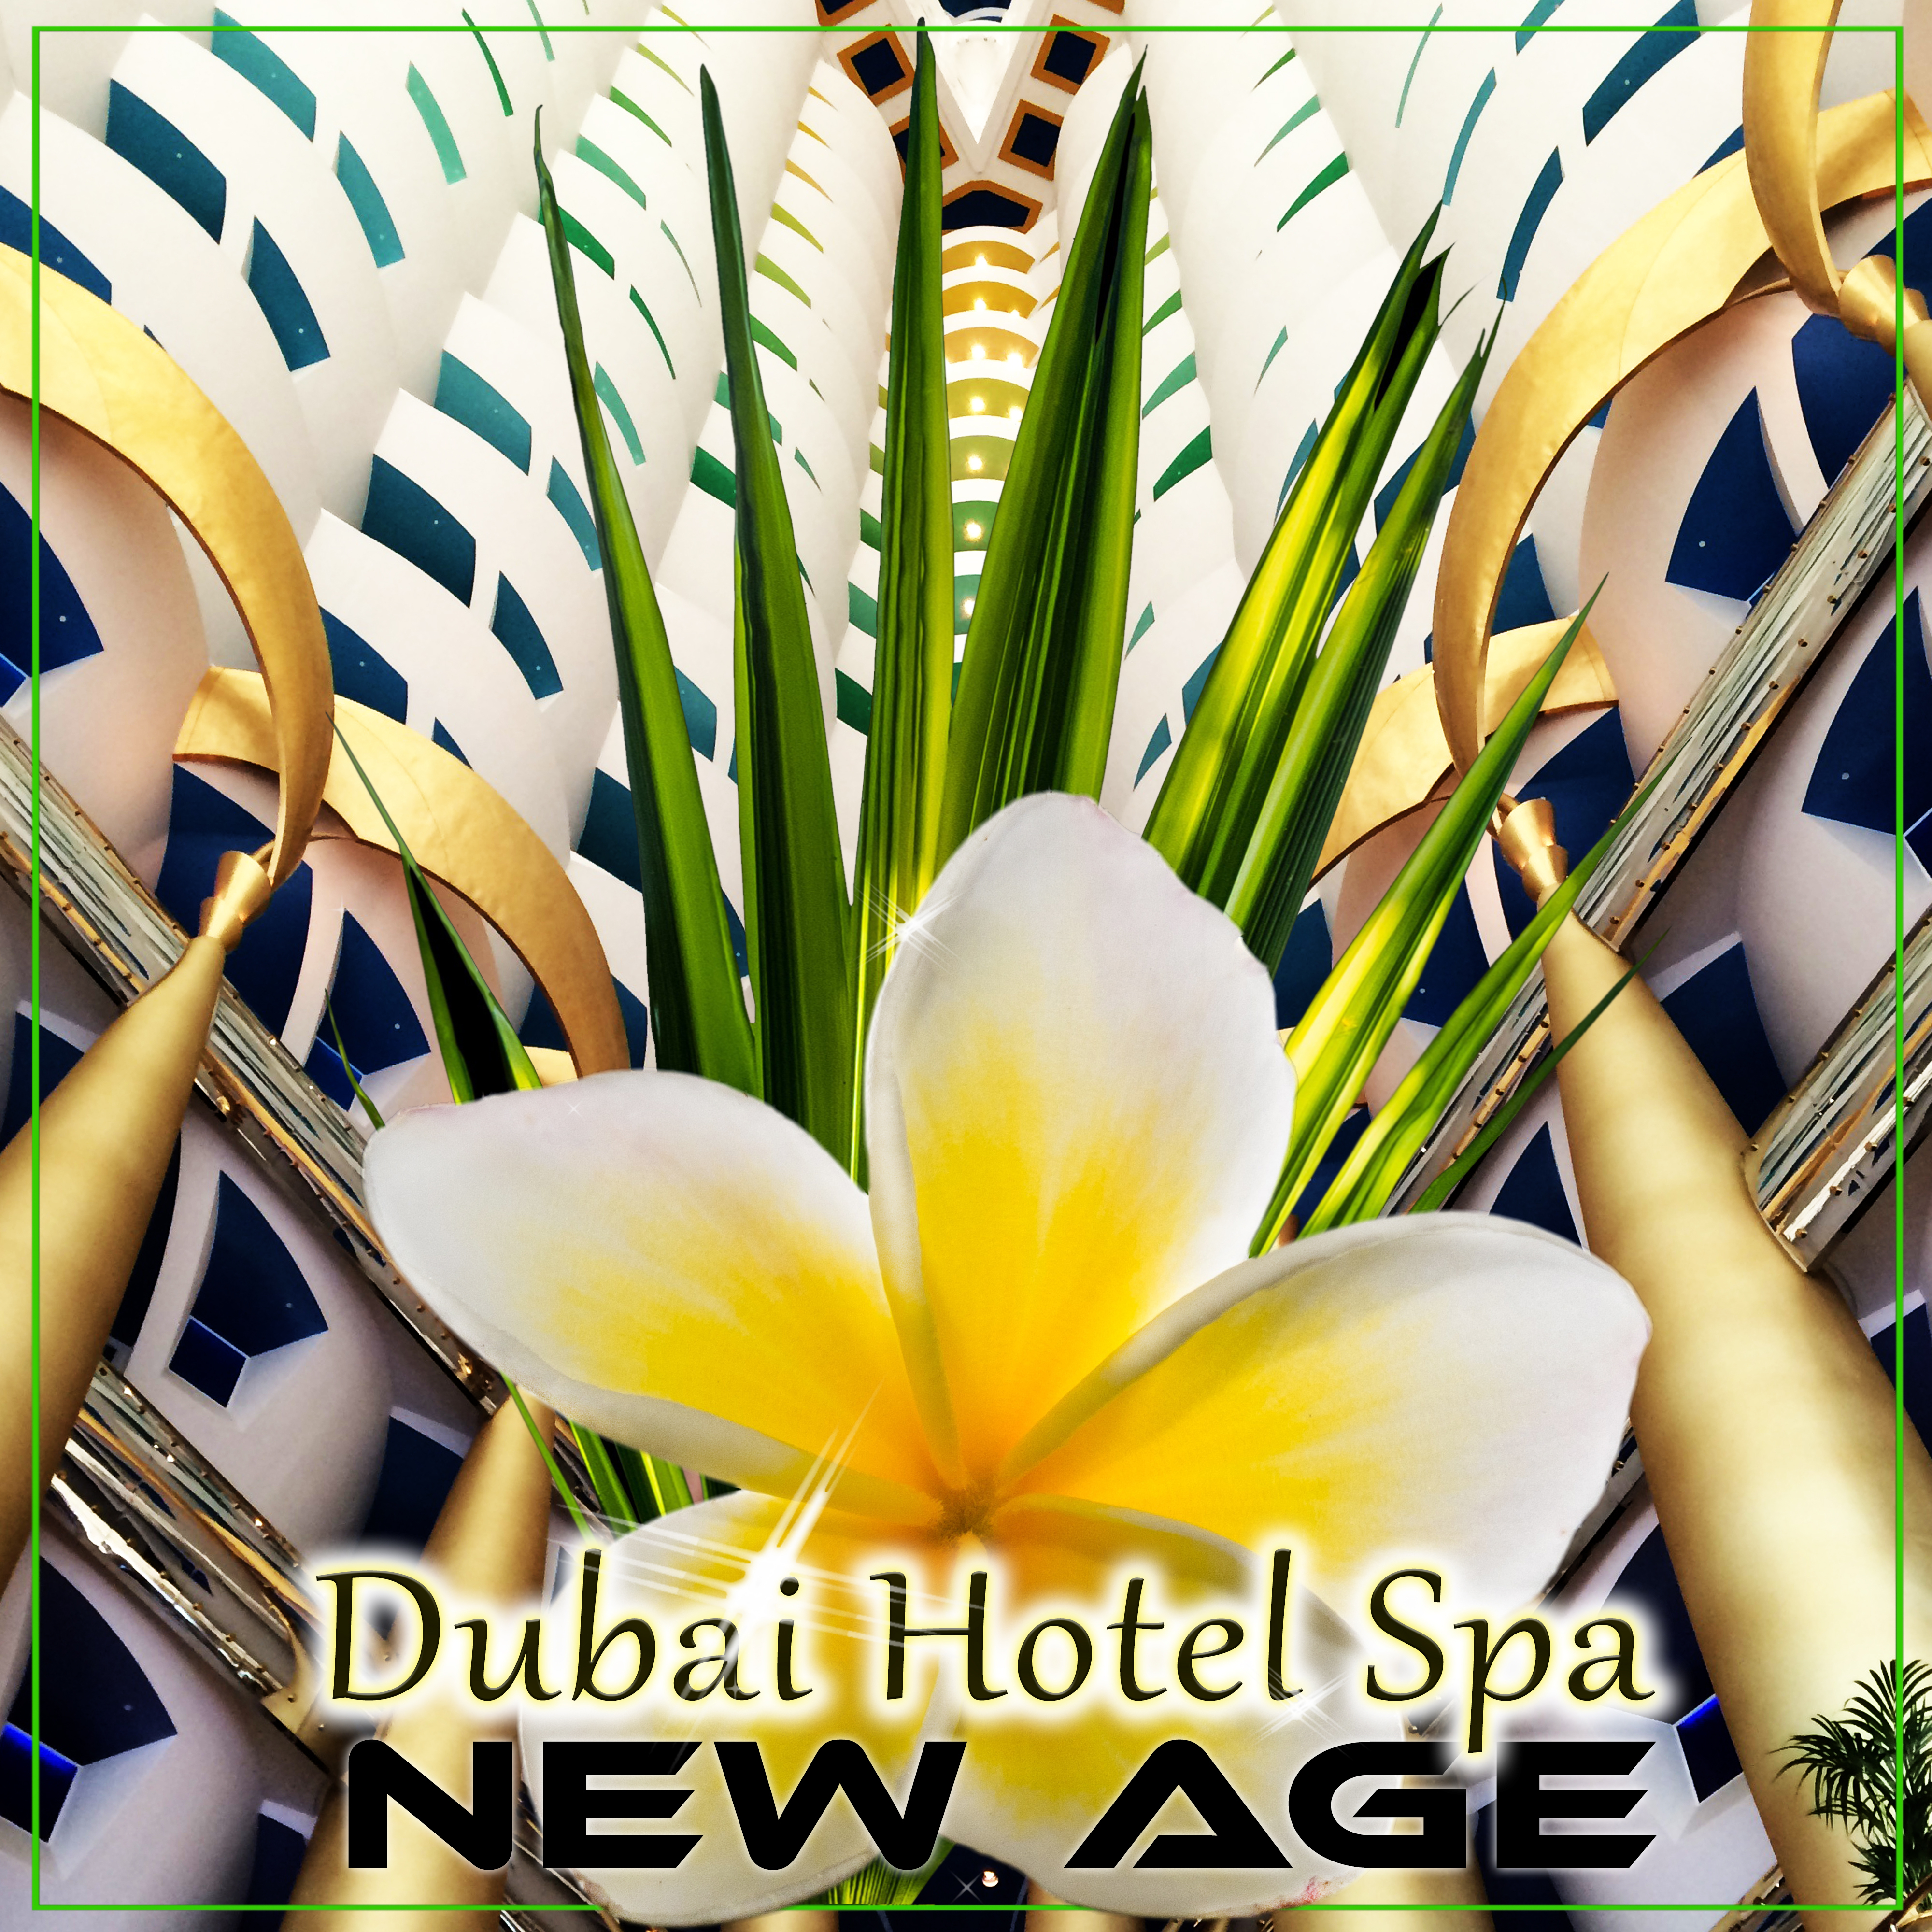 Dubai Hotel Spa  New Age  Music for Massage, Music Therapy, Ocean Waves, Hydro Energy Body Massage, First Class, Aromatherapy, Wellness, WellBeing